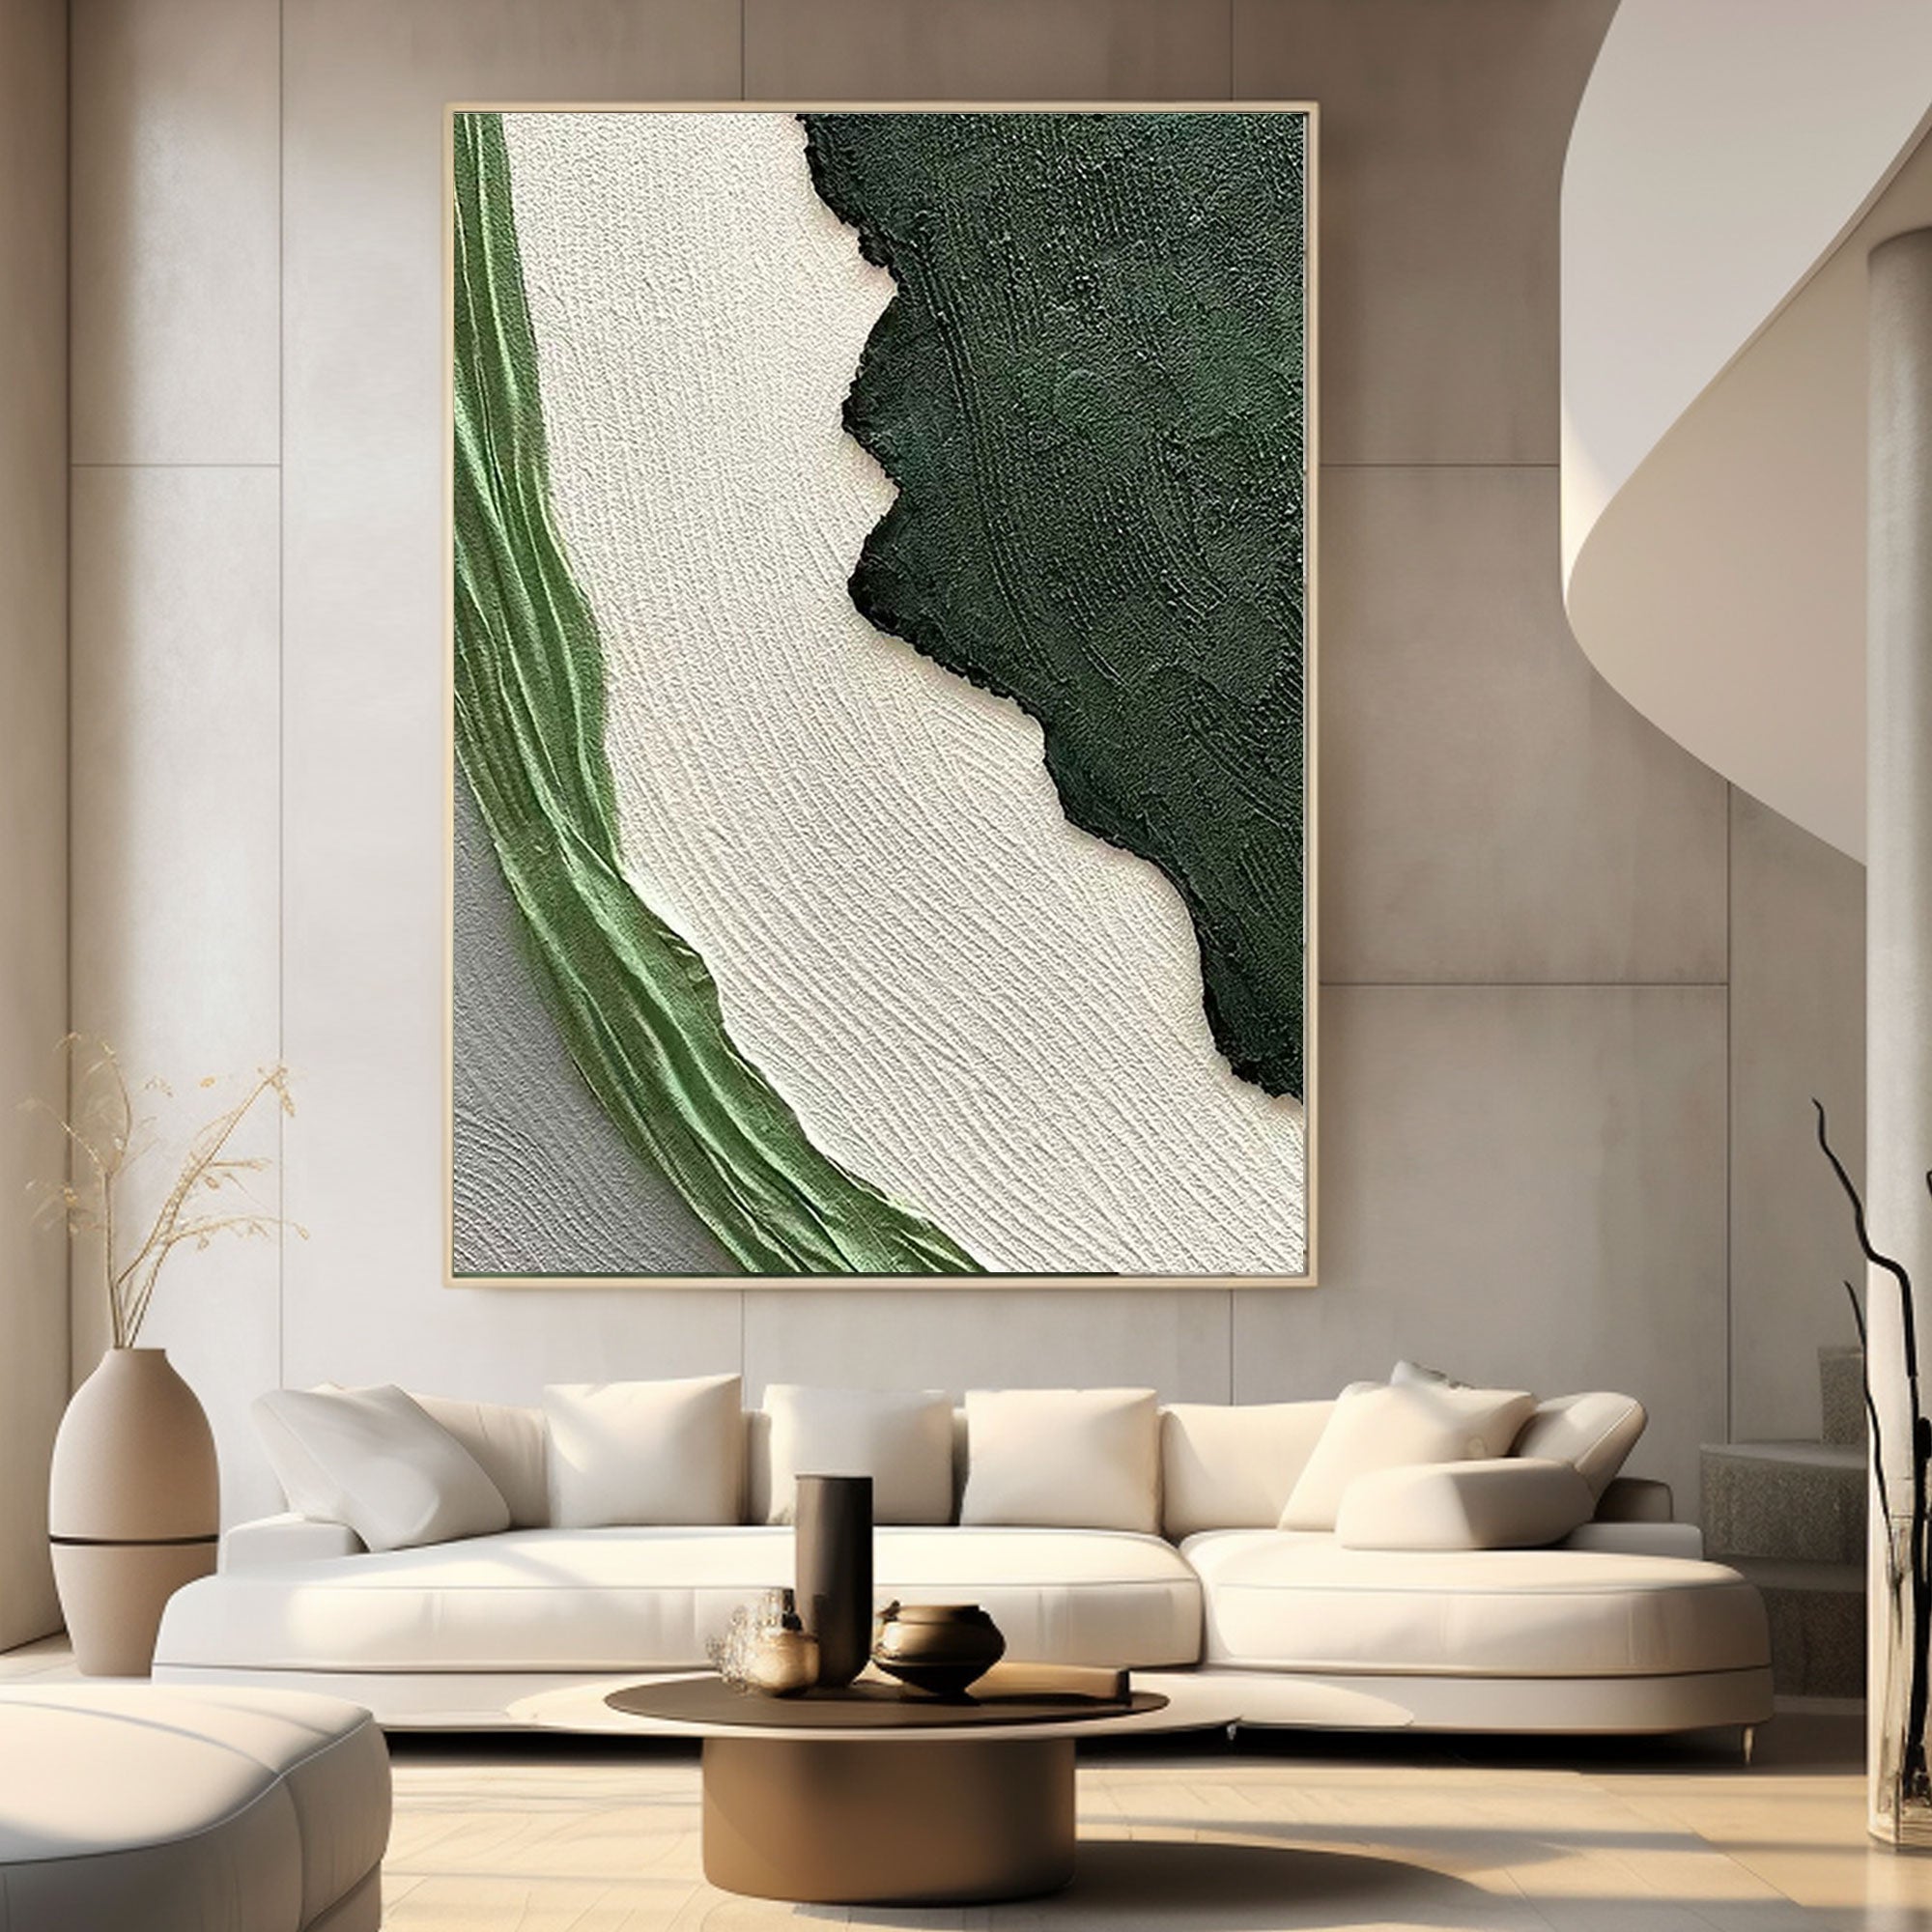 3D Textured Colorful Wall Art Painting  "Whispers of the Verdant Breeze"